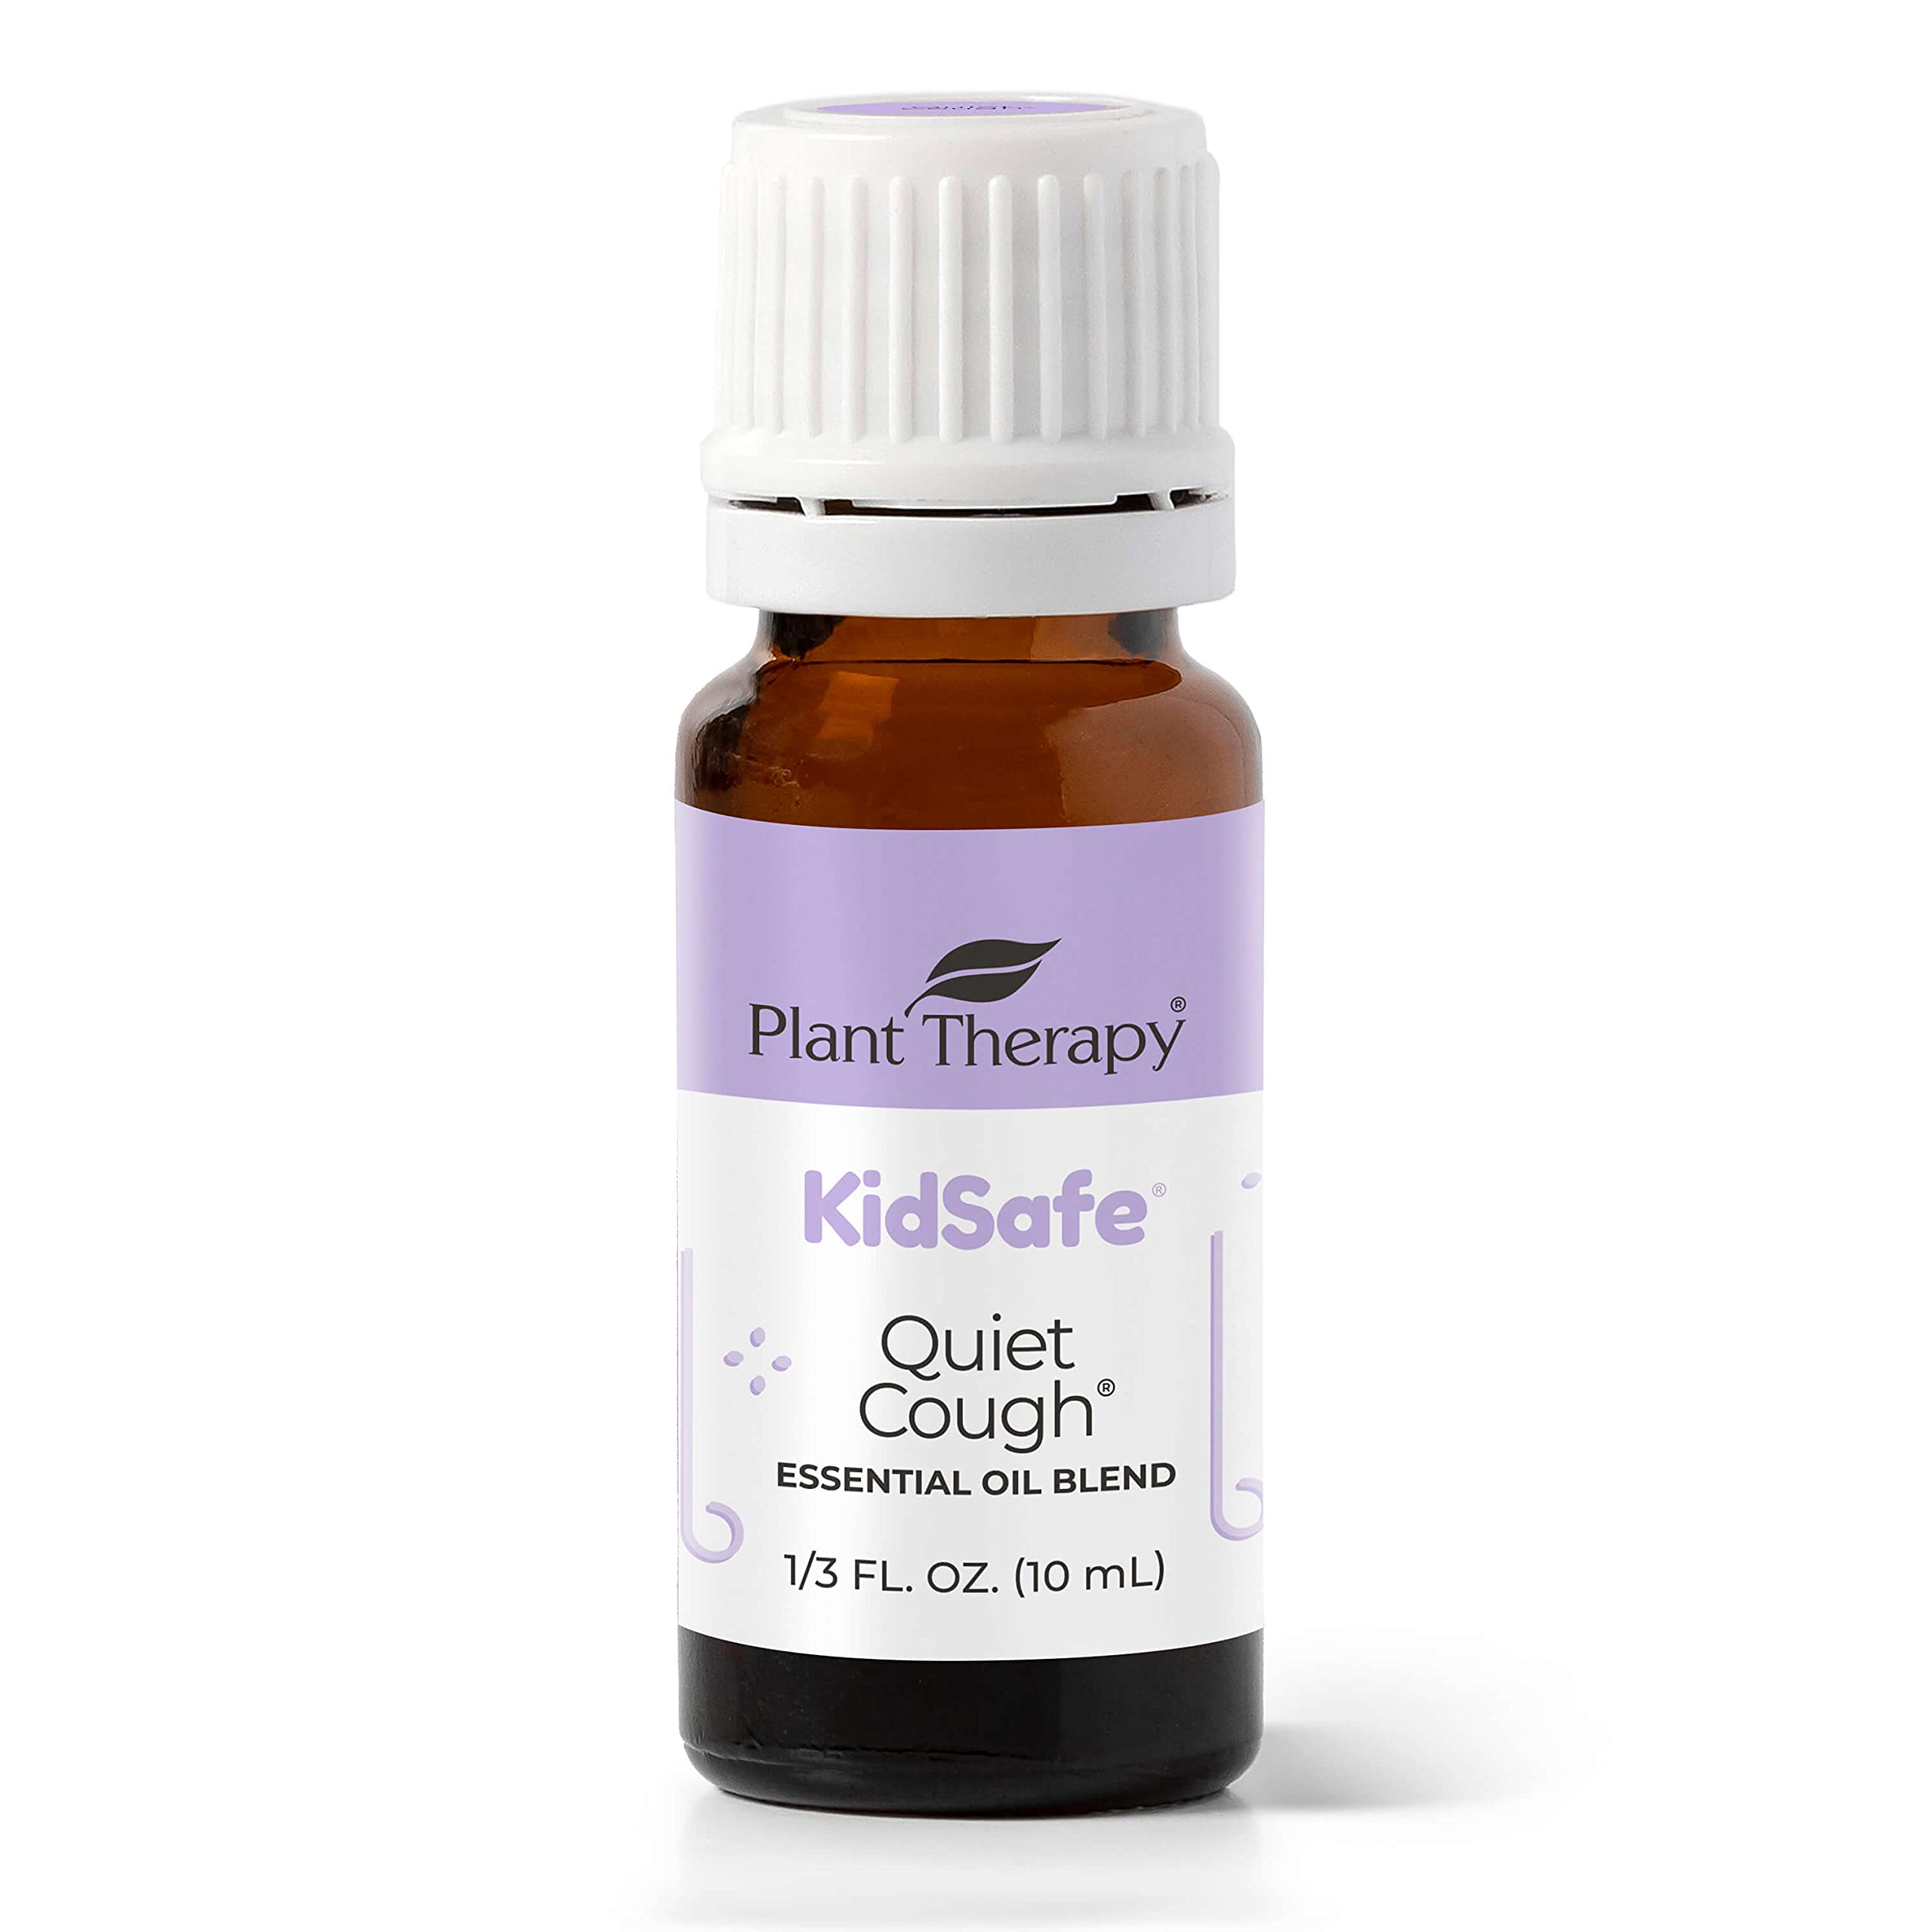 Plant Therapy Quiet Cough KidSafe Essential Oil Blend 10 mL (1/3 oz) 100% Pure, Undiluted, Therapeutic Grade